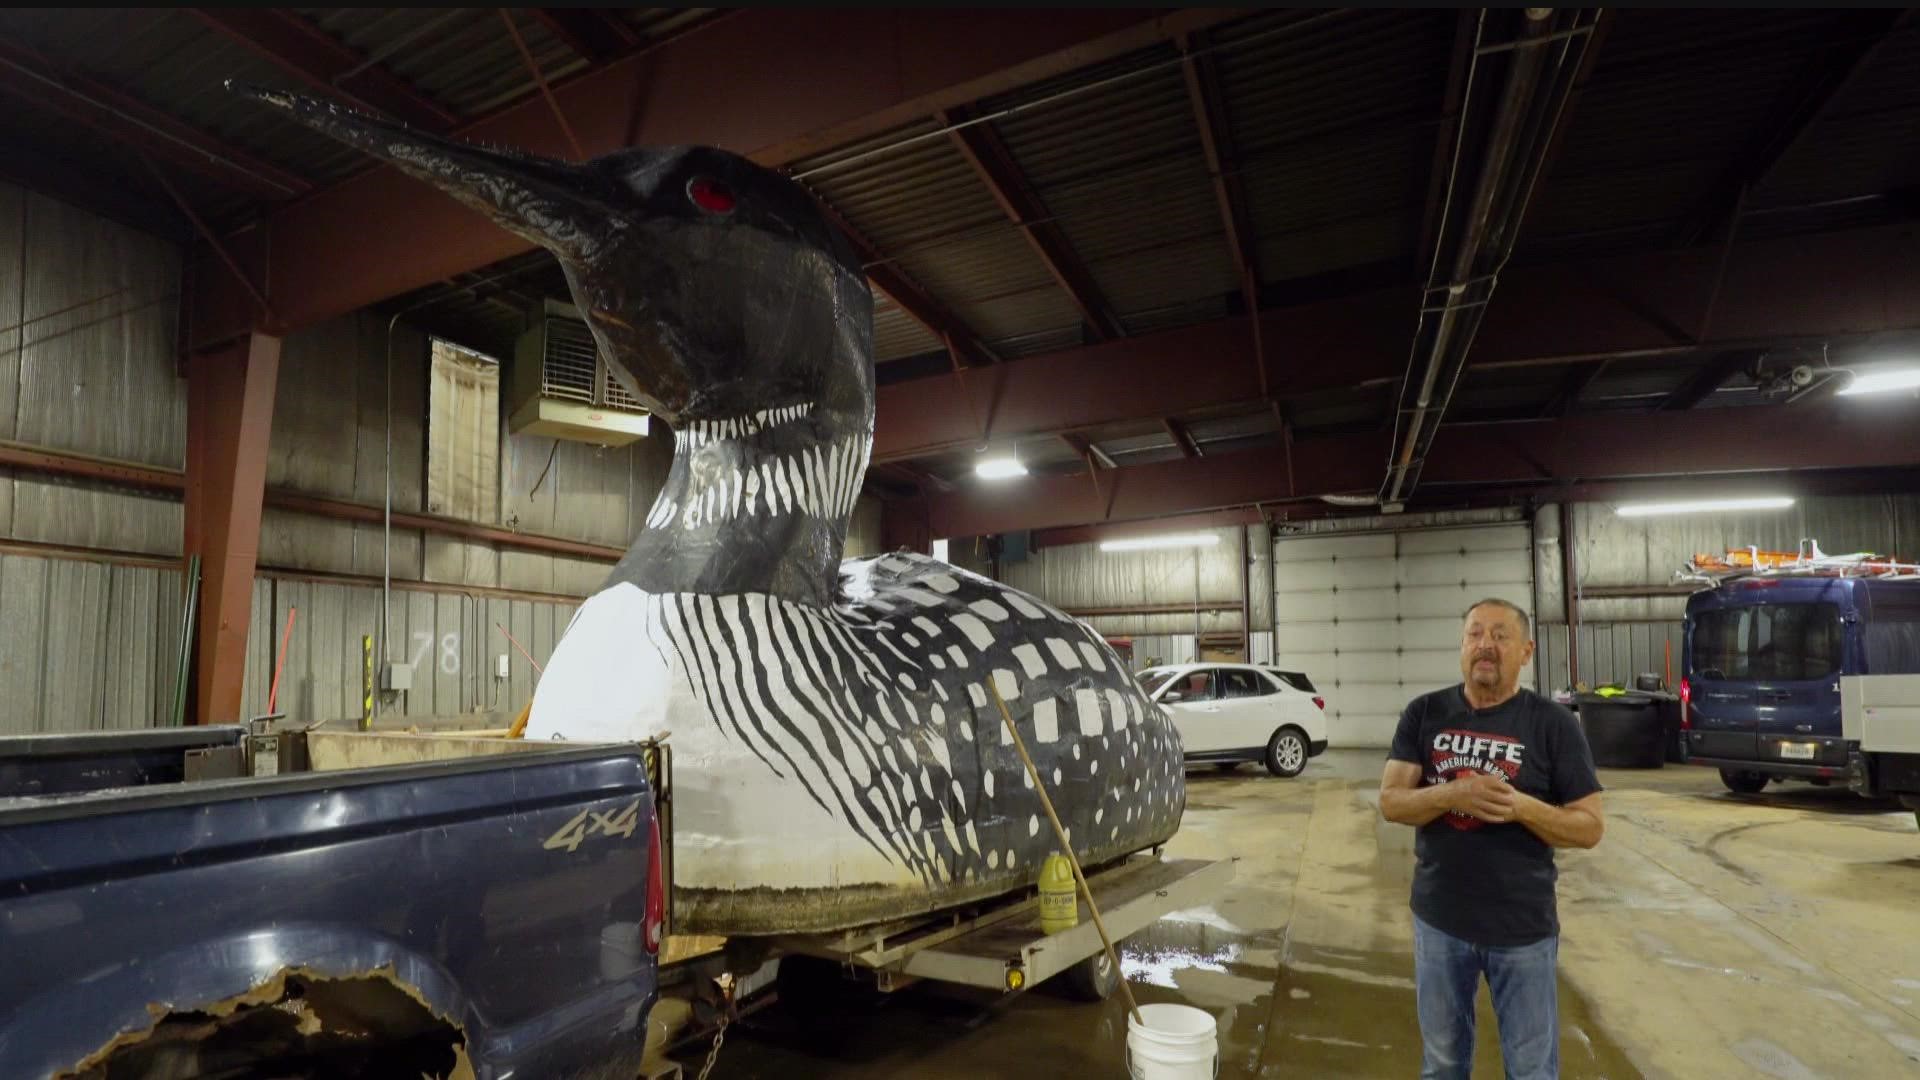 The world’s largest floating loon will temporarily migrate to the Twin Cities from Virginia to be displayed at this year’s Minnesota State Fair.